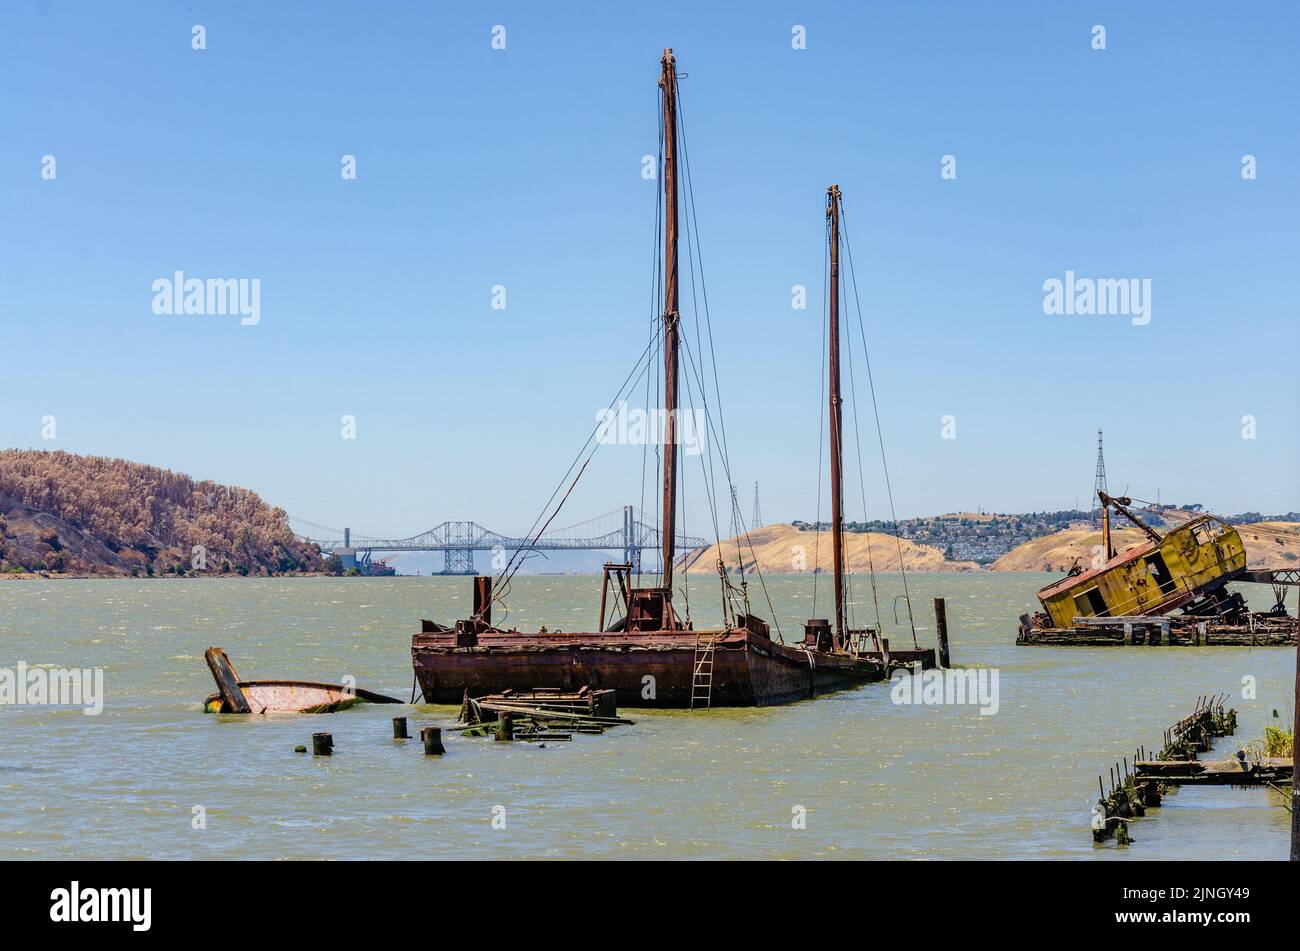 A view from Benicia across the Carqunez Strait with a sunken boat in the foreground and the Alfred Zampa Memorial Bridge in the distance in California Stock Photo